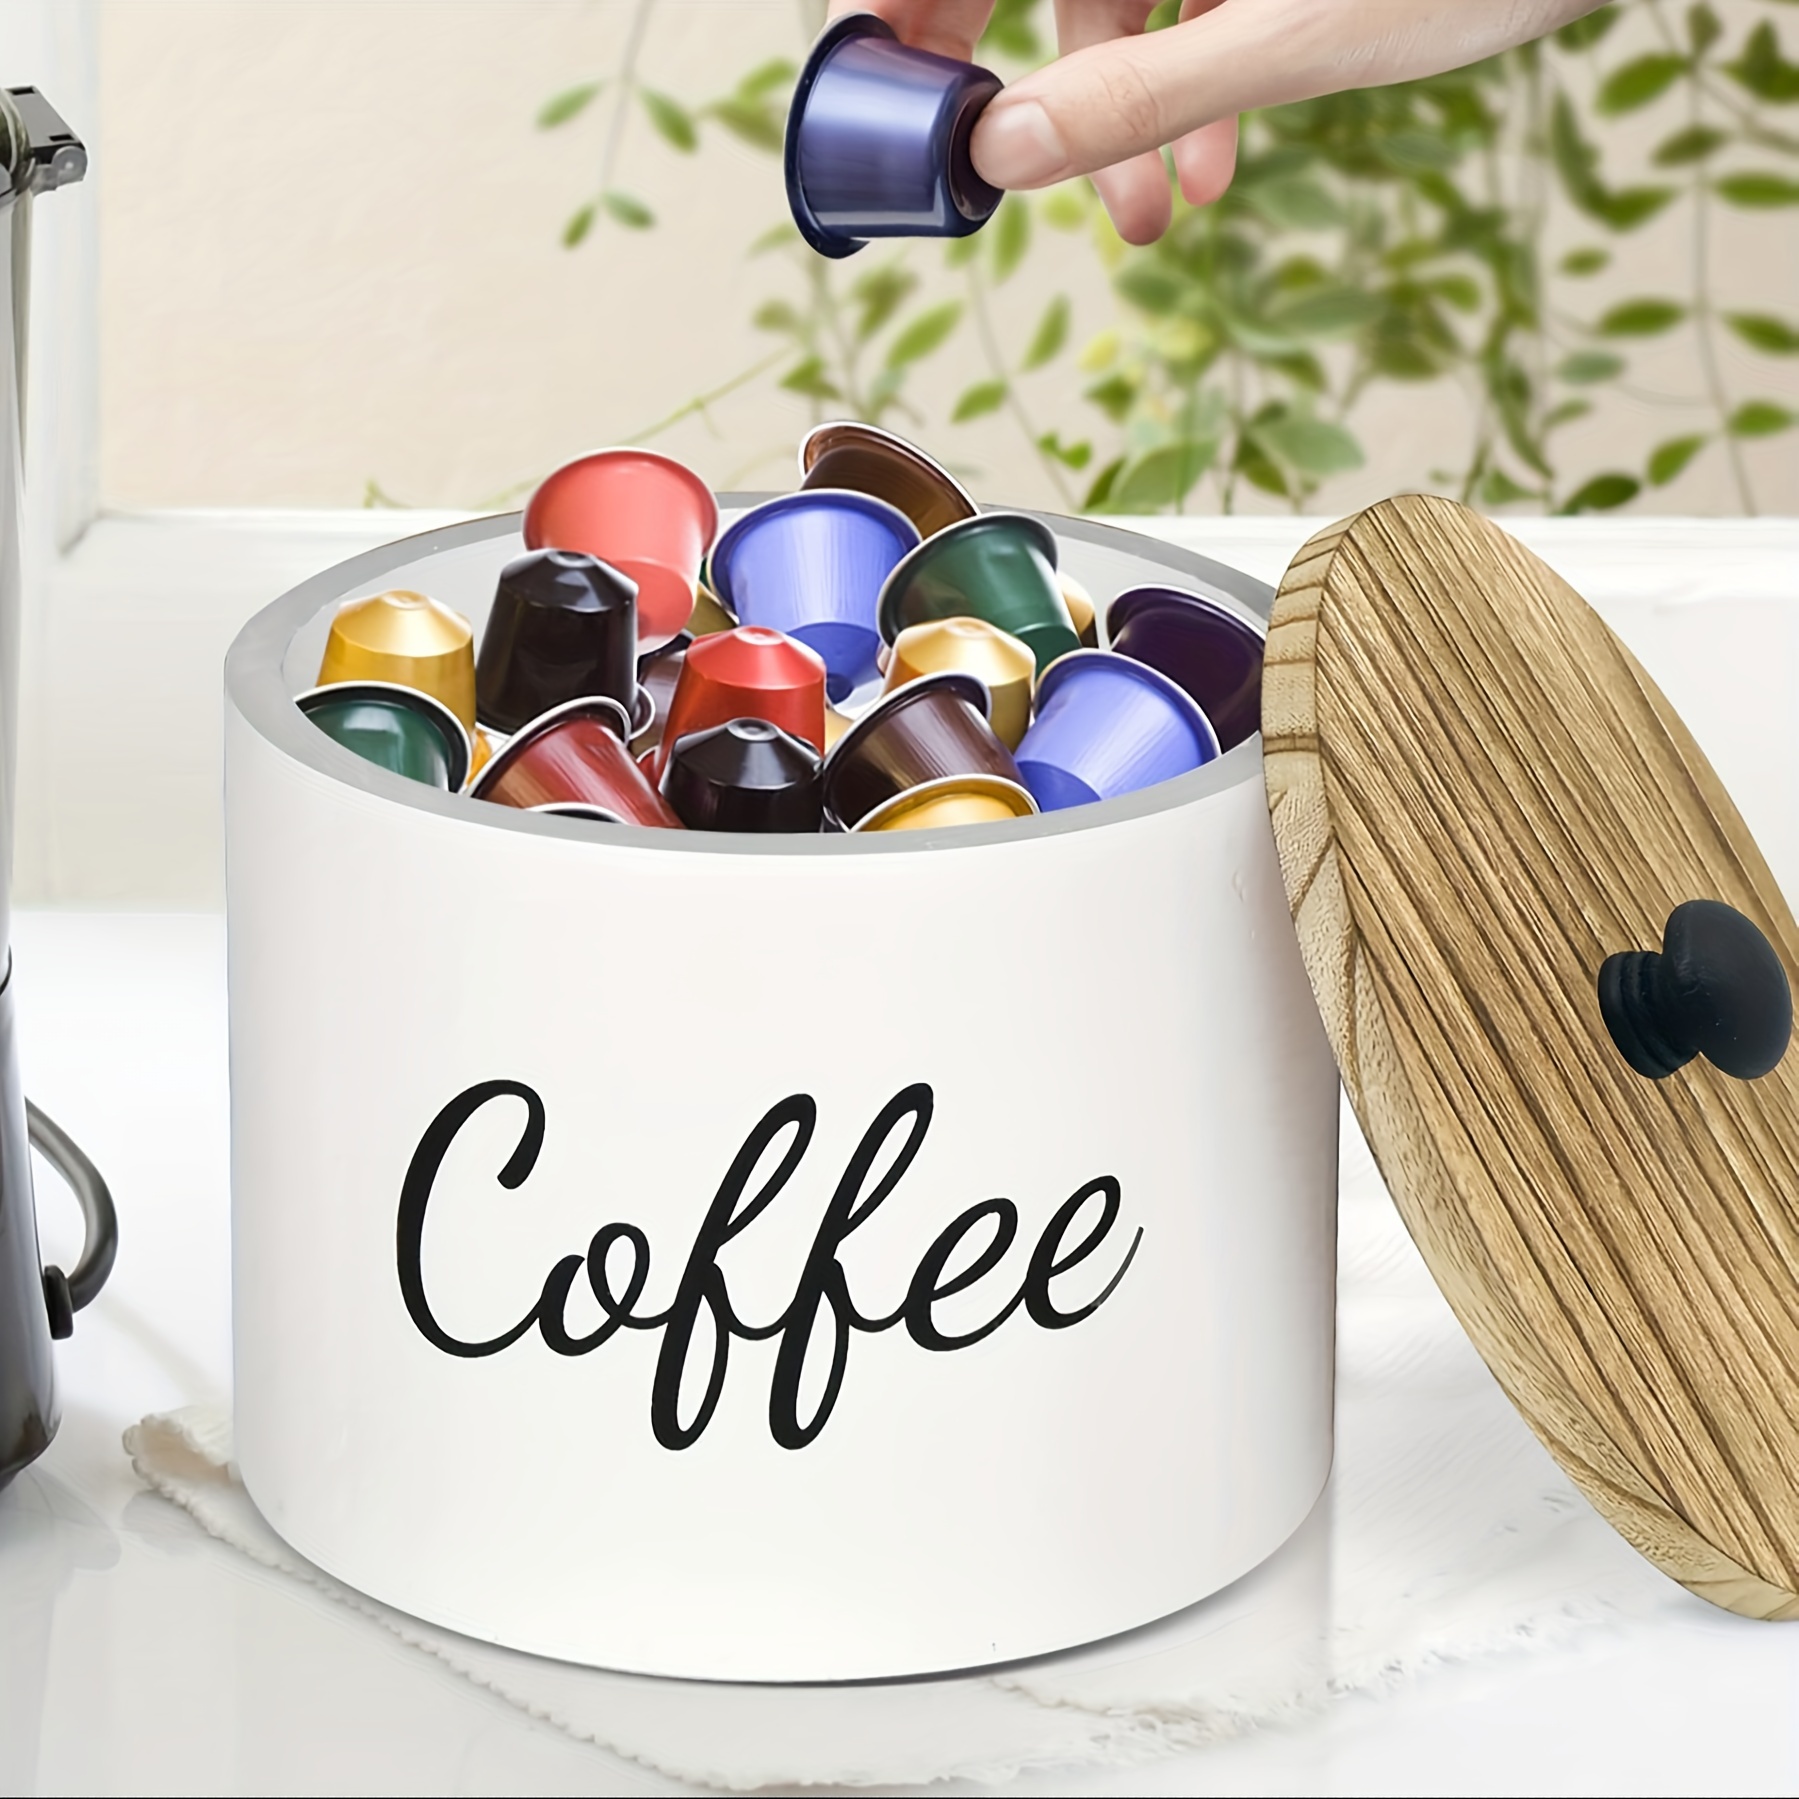 Coffee Station Organizer, Farmhouse Coffee Bar Accessories Organizer for  Counter, Wooden Coffee Pod Kcup Storage Basket with Handle, Rustic Coffee